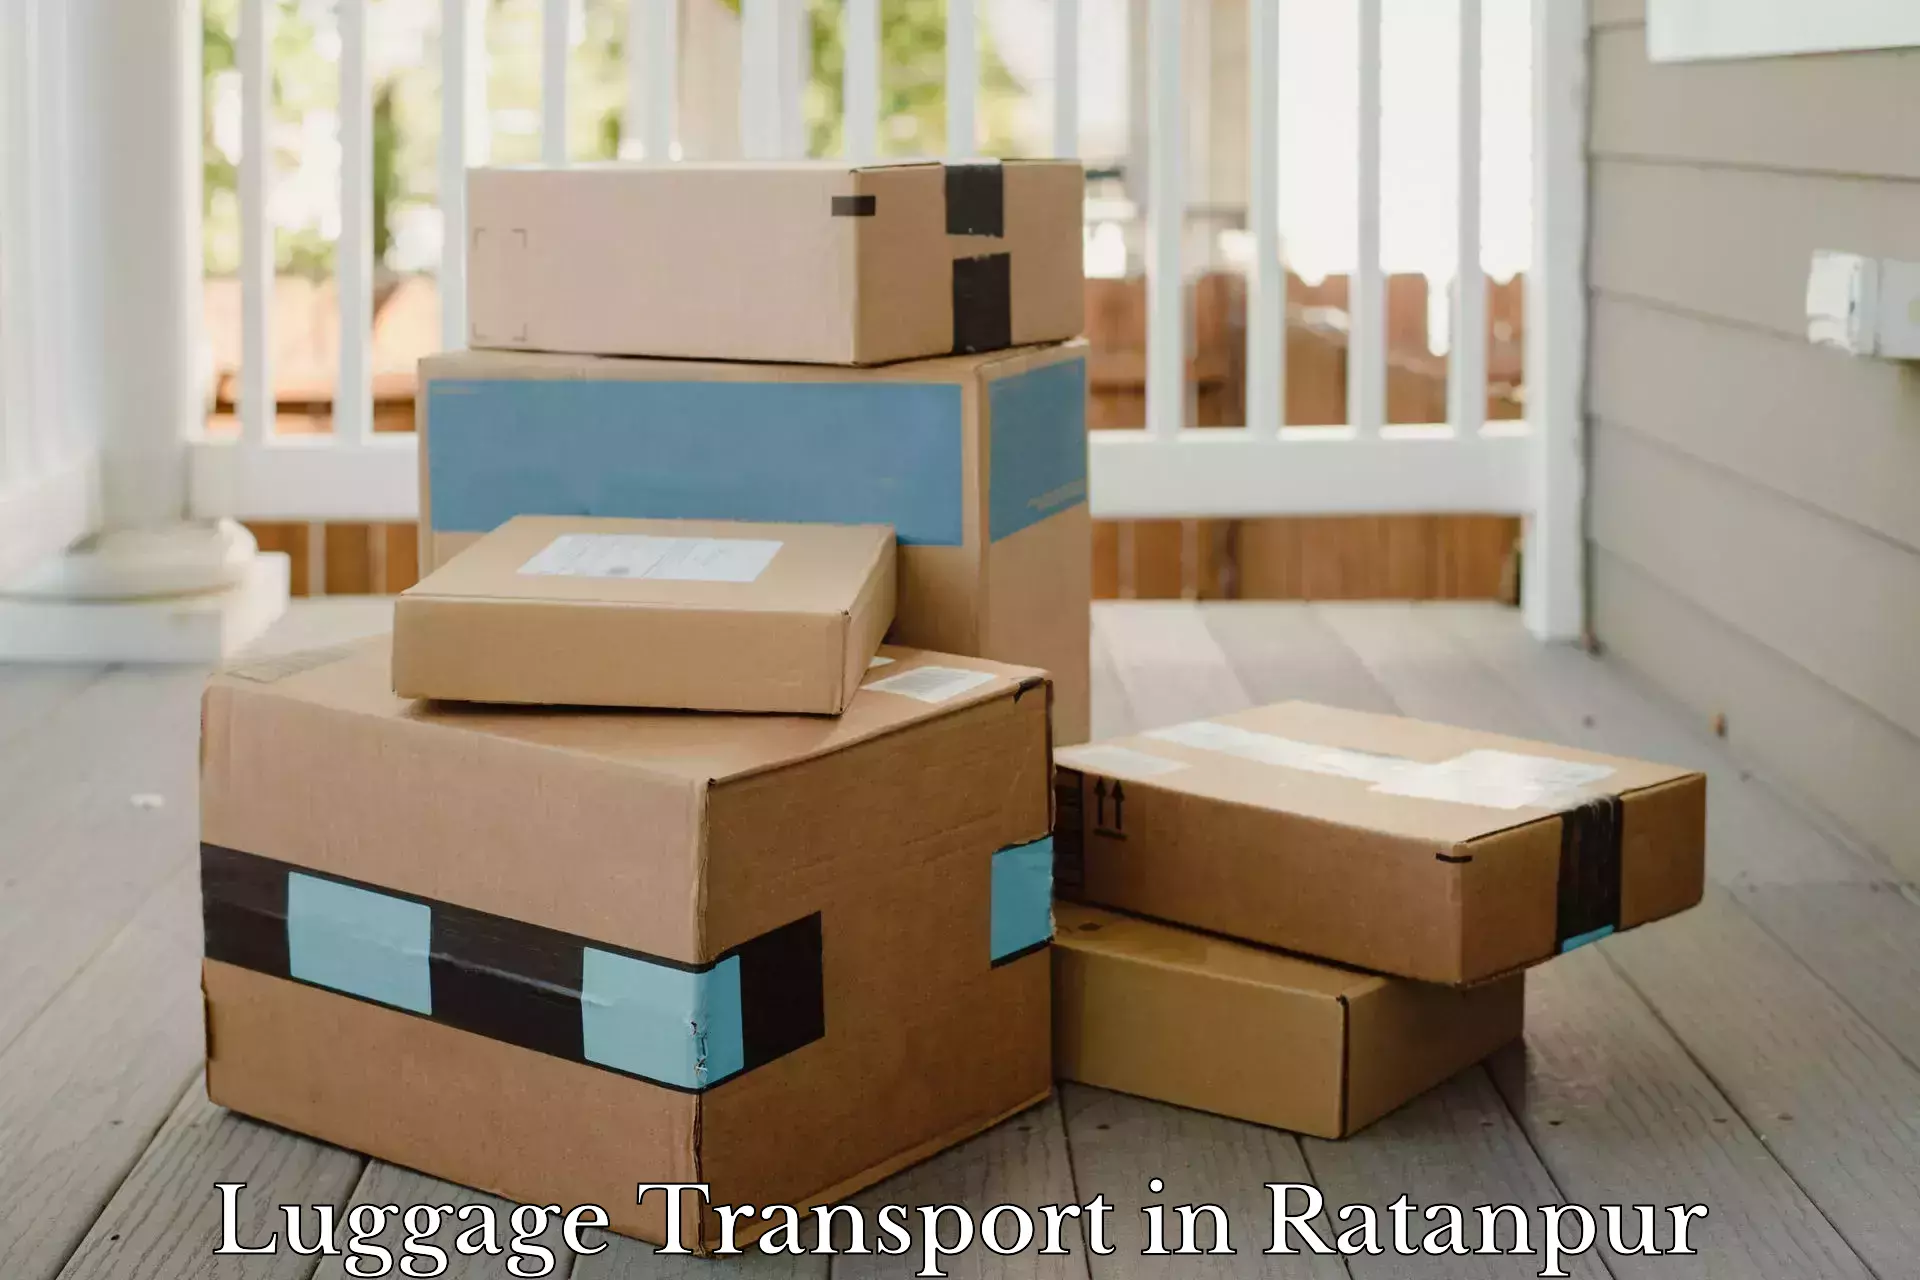 Baggage transport technology in Ratanpur